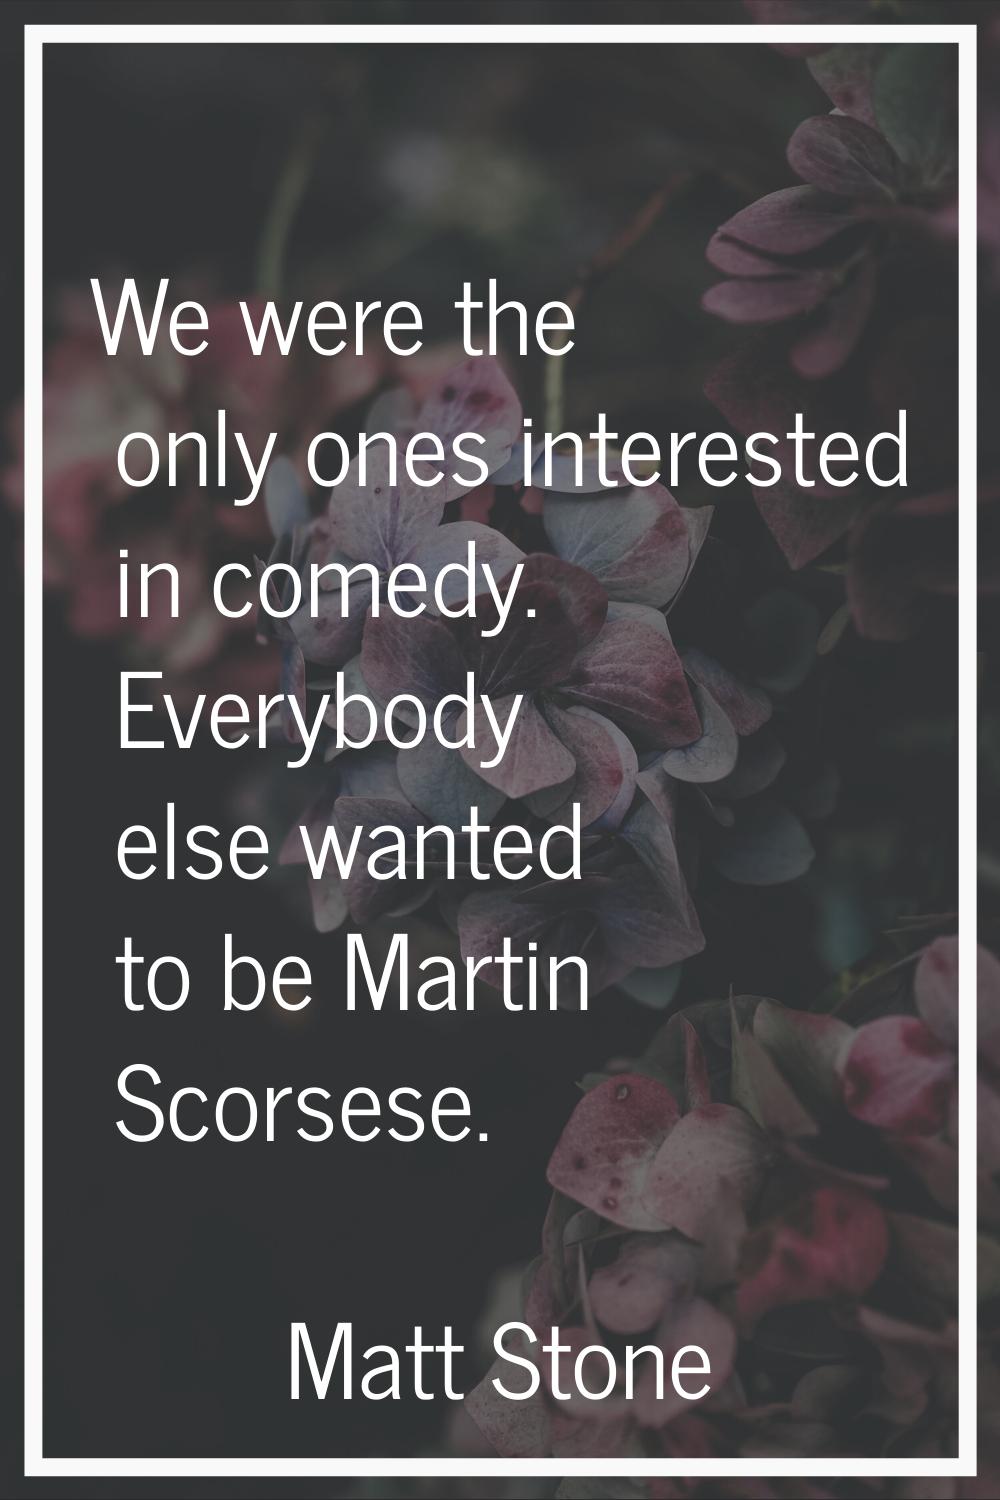 We were the only ones interested in comedy. Everybody else wanted to be Martin Scorsese.